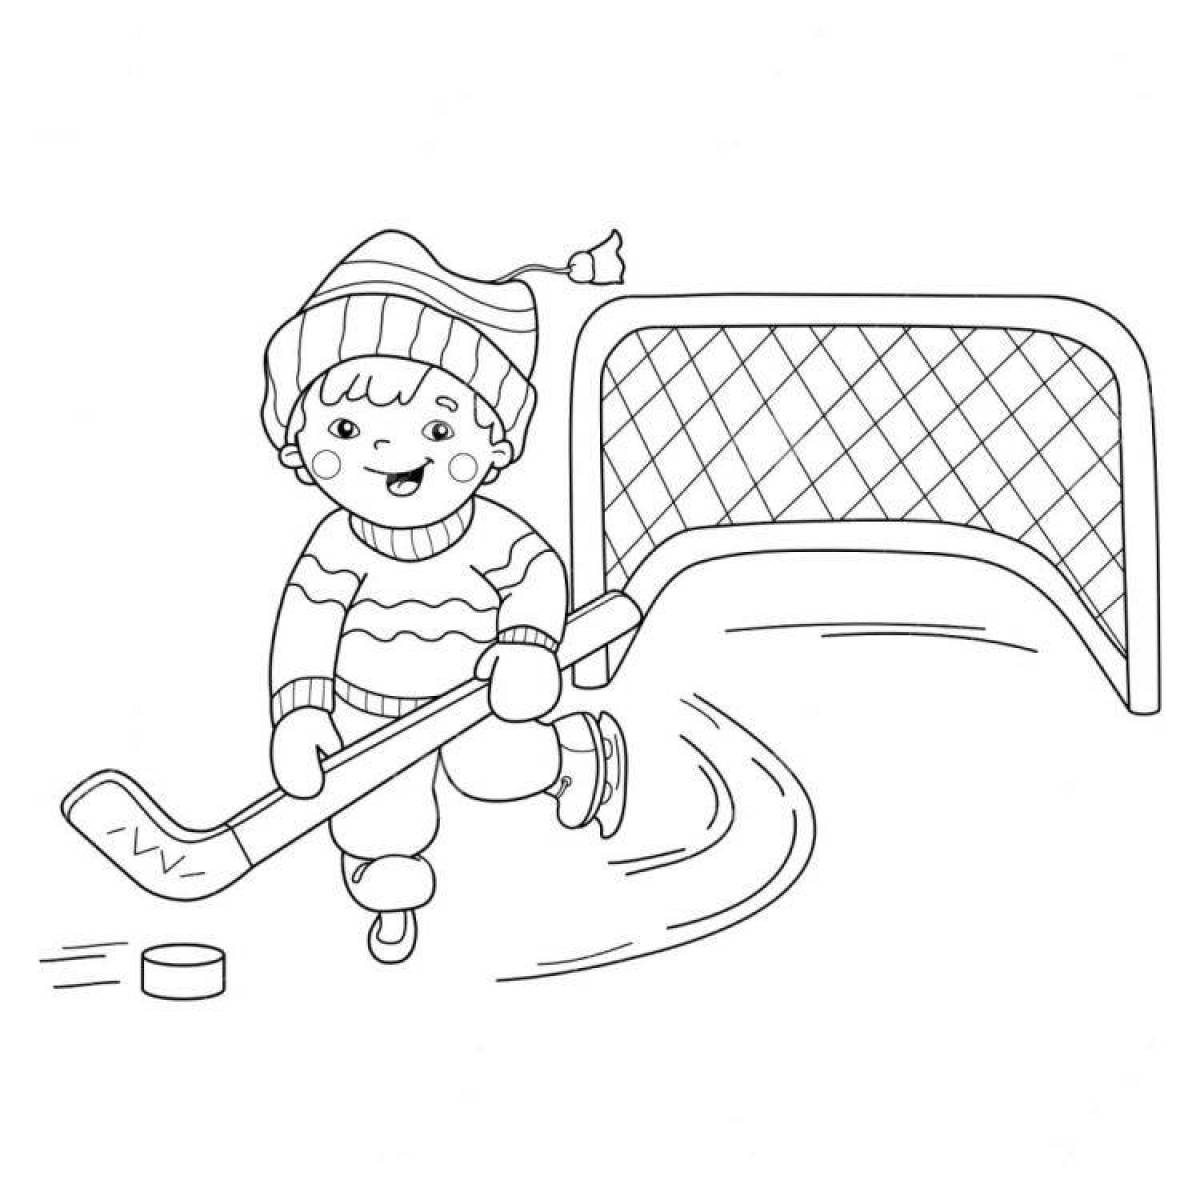 Magic winter sports coloring page for 4-5 year olds